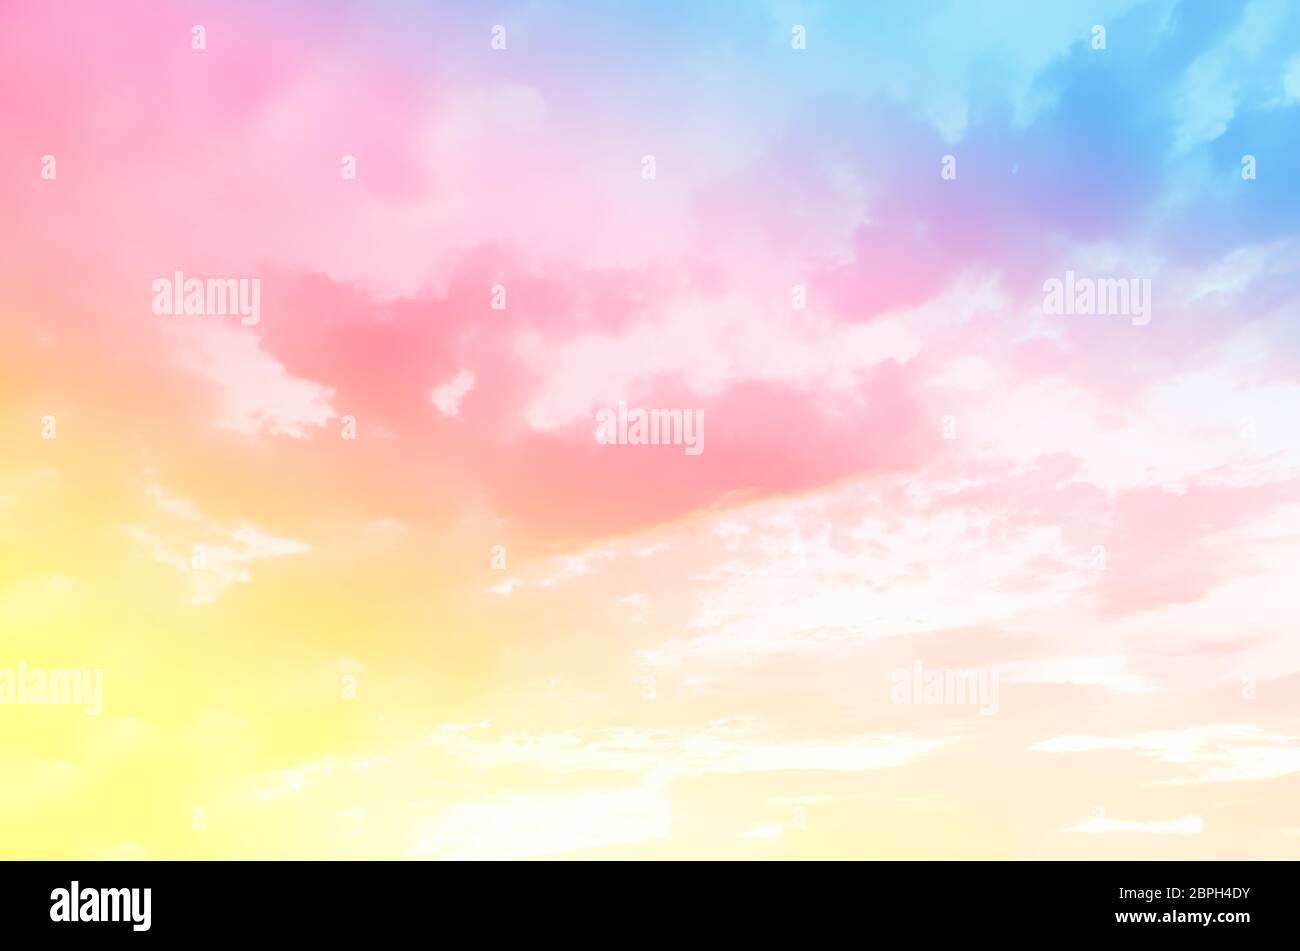 Abstract blurred colorful sky and cloud nature background Stock